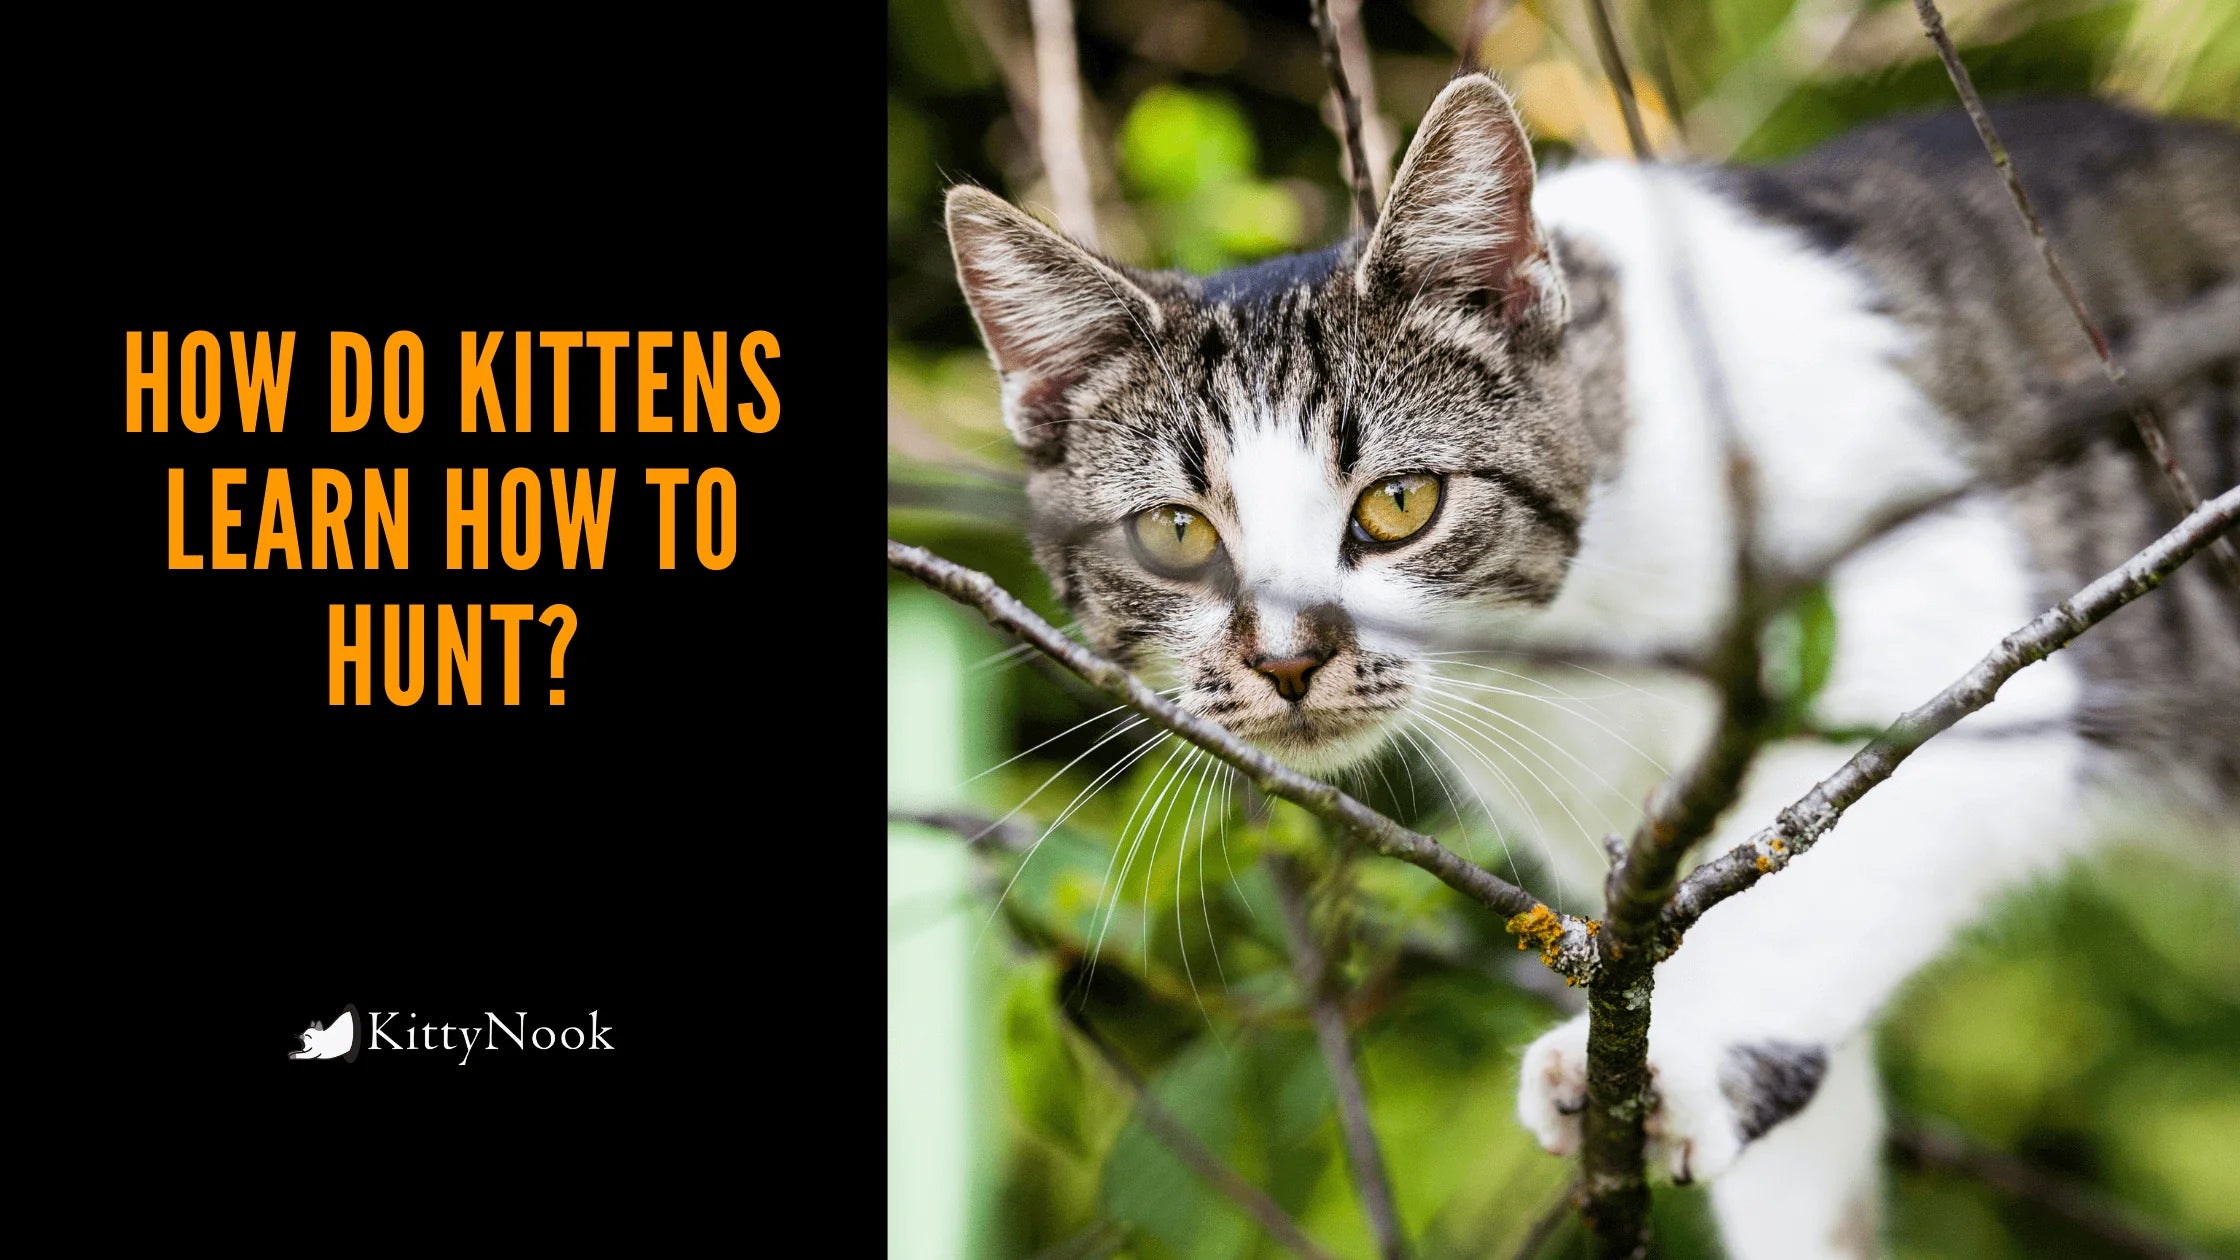 How Do Kittens Learn How To Hunt? - KittyNook Cat Company